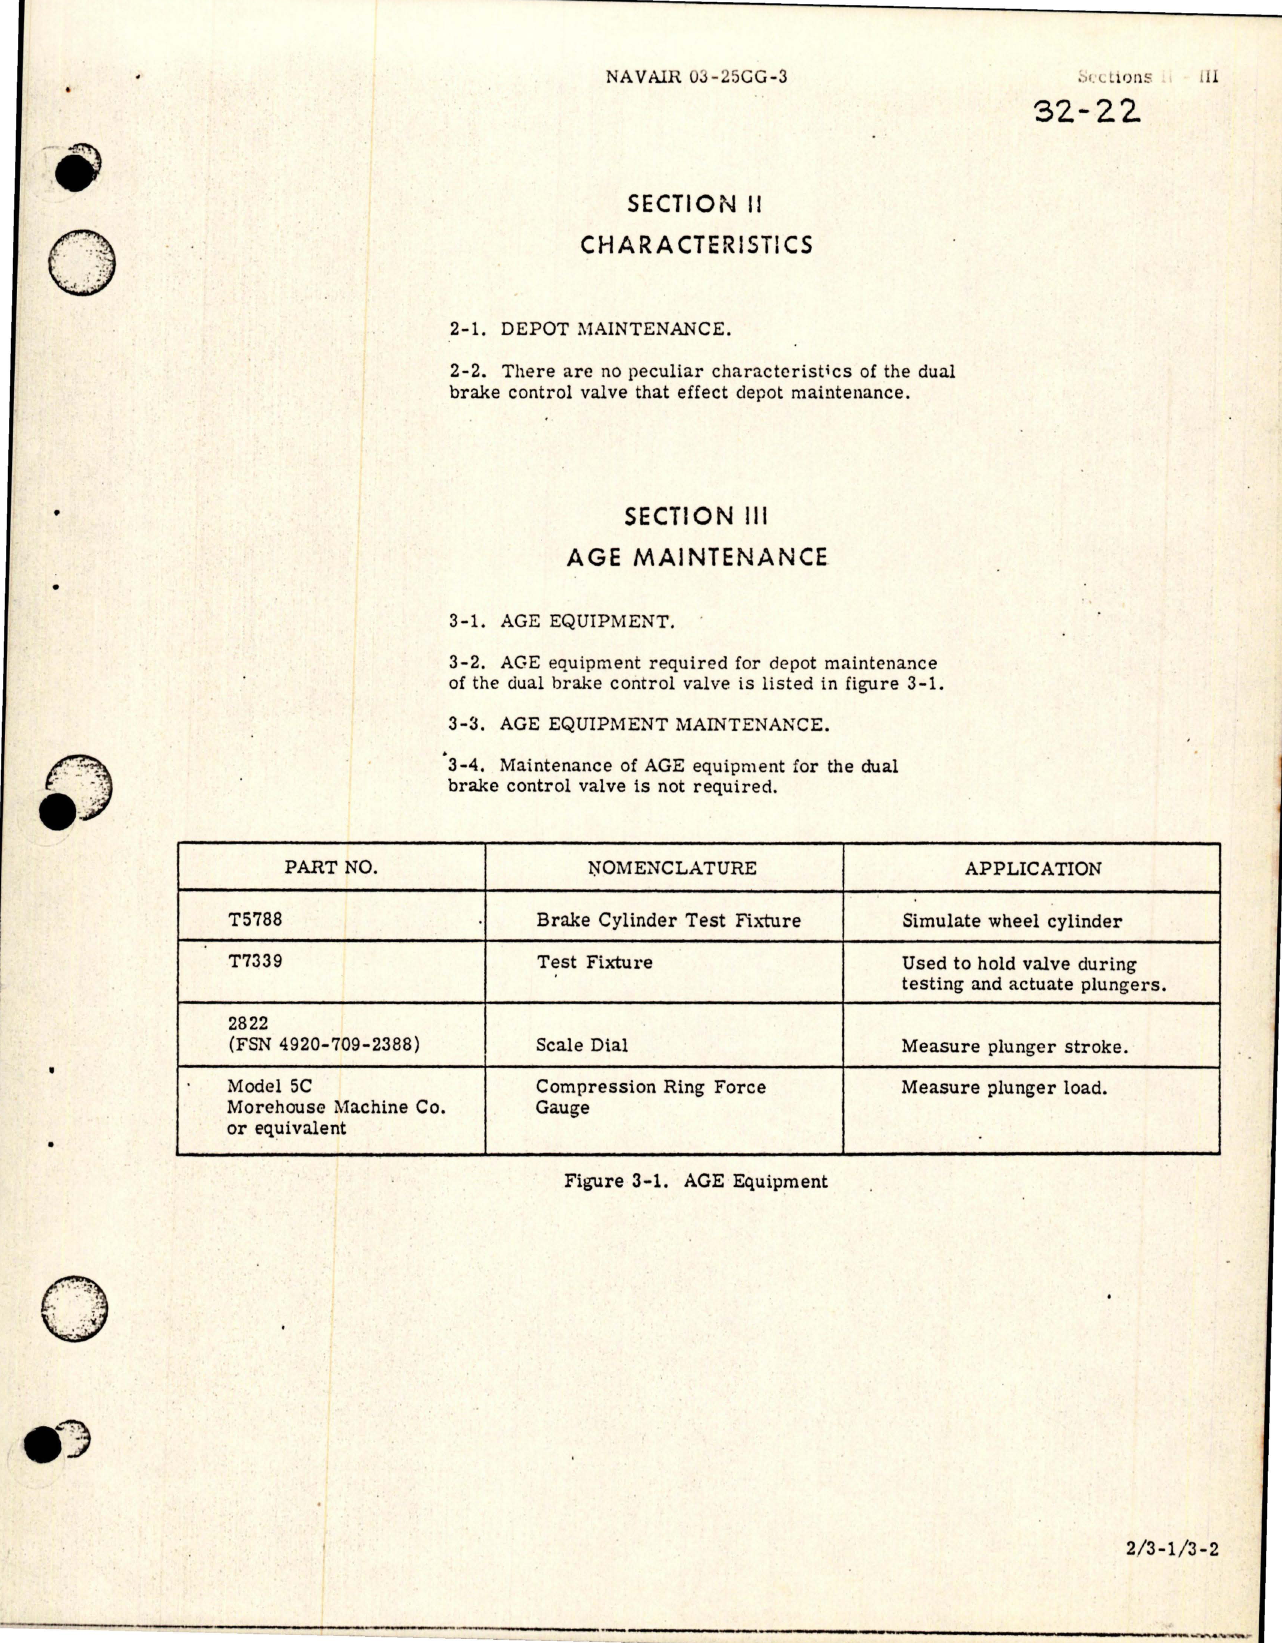 Sample page 5 from AirCorps Library document: Maintenance for Dual Brake Control Valve - Part 23410-3 